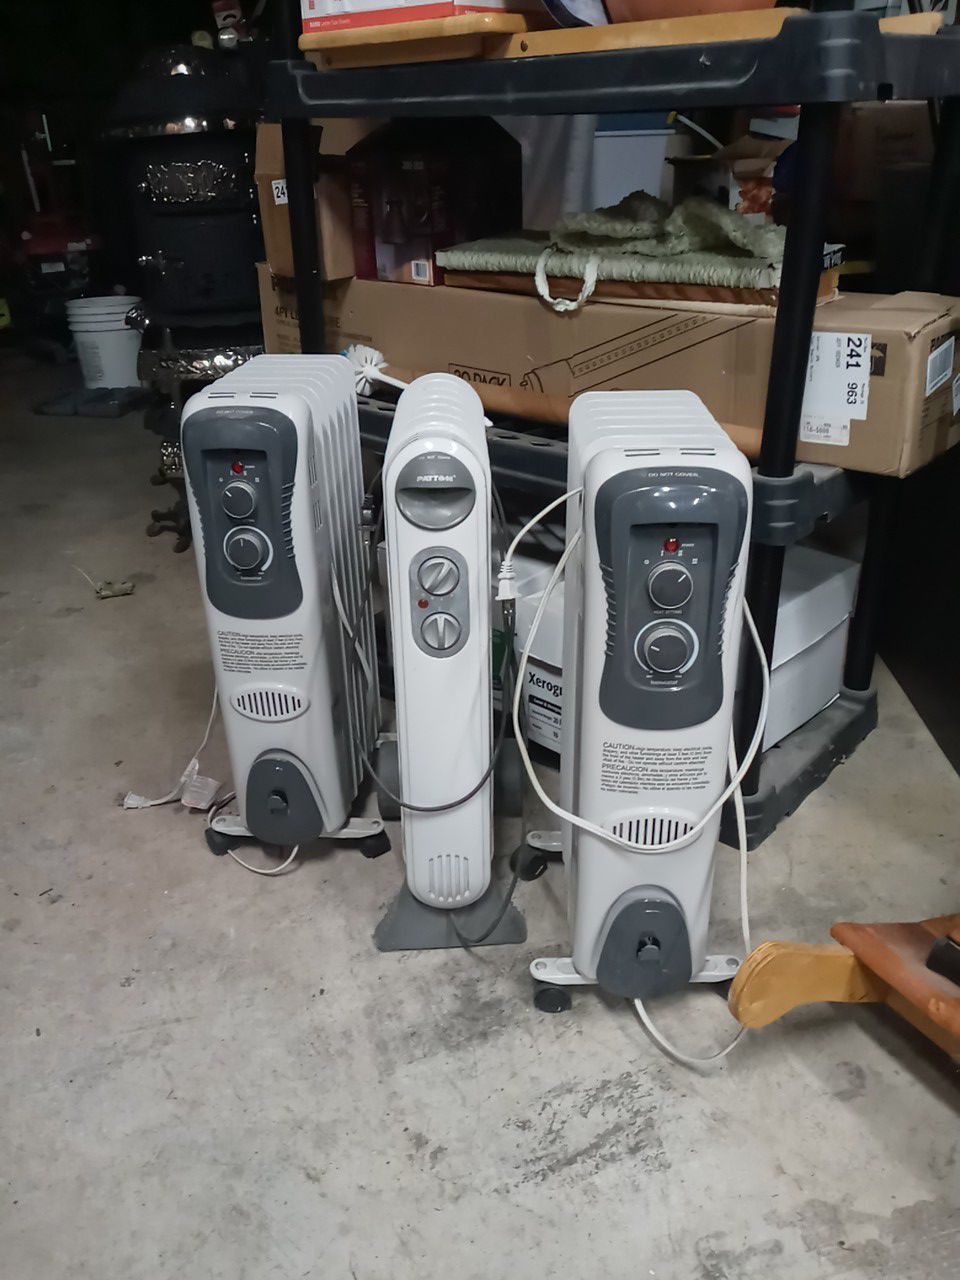 3 Oil Filled Portable Room Heaters